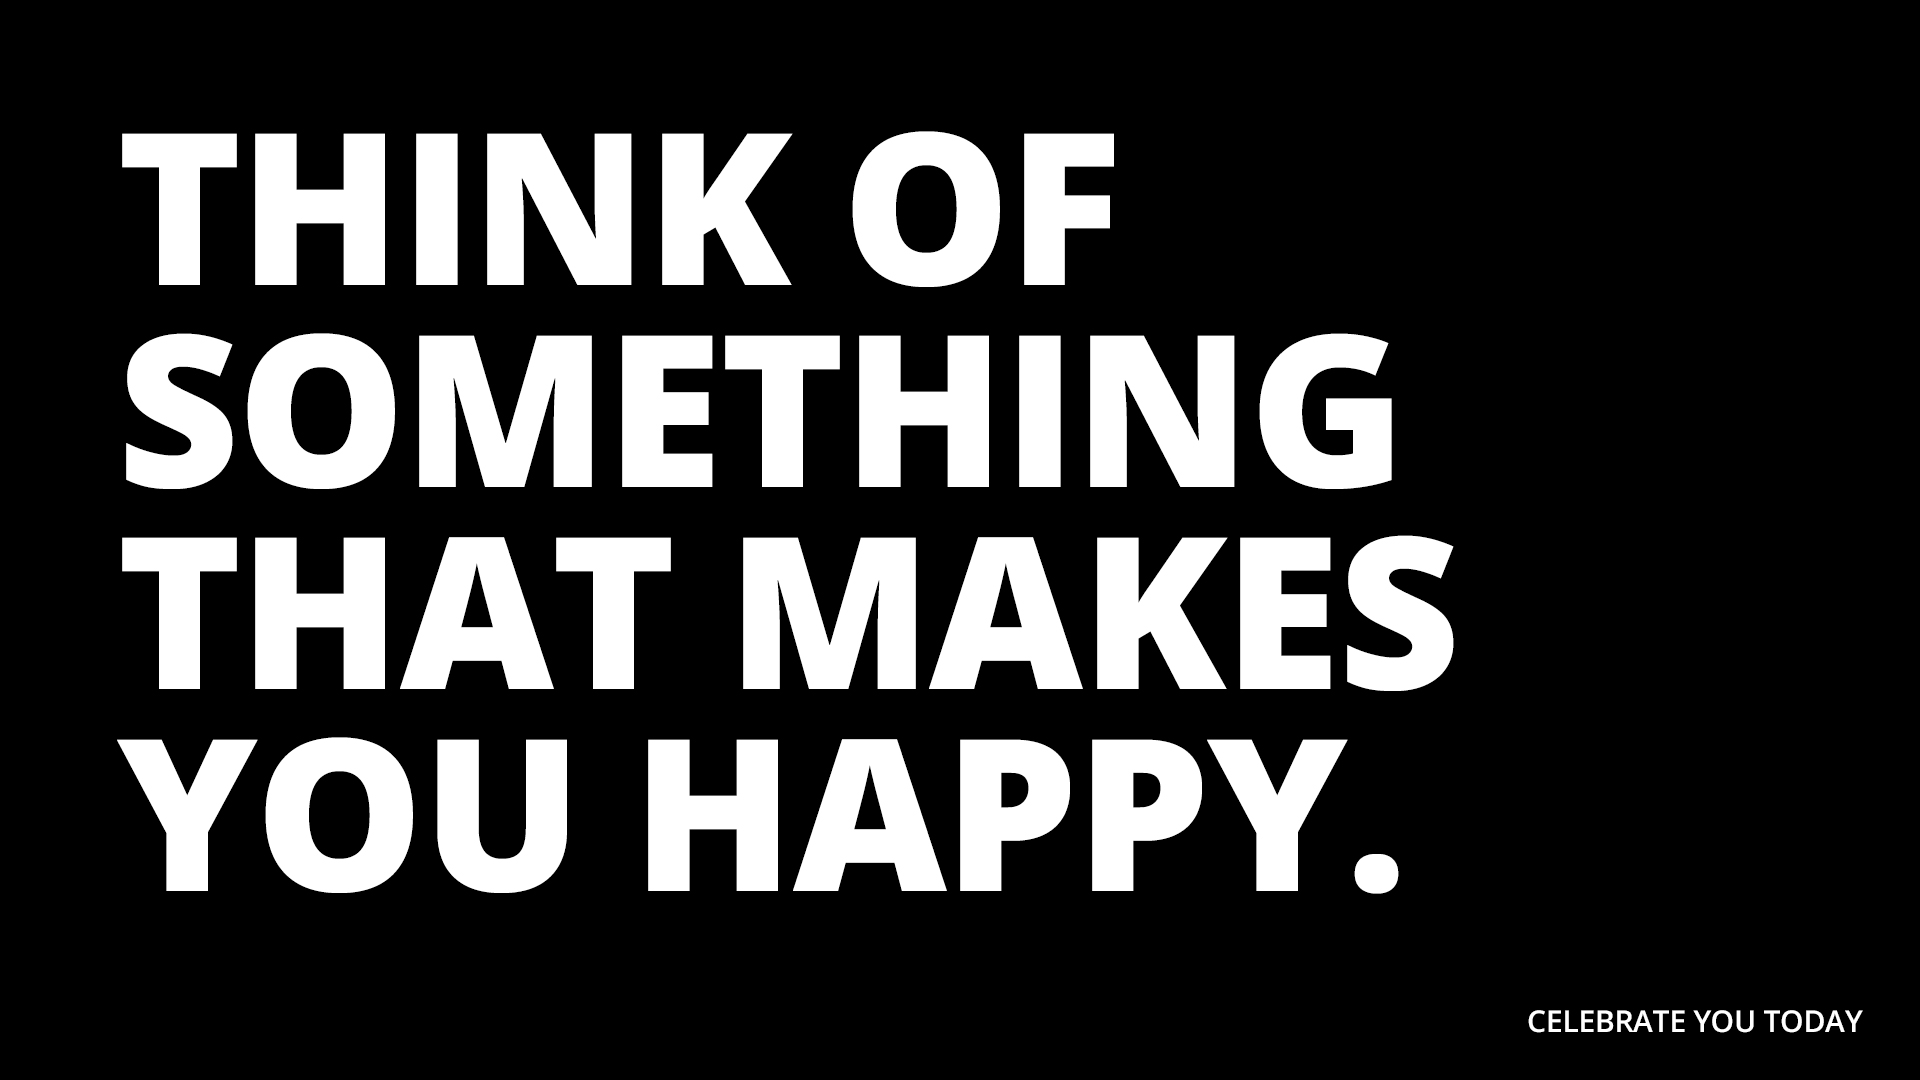 Free Graphic | Celebrate You | Think of Something That Makes You Happy